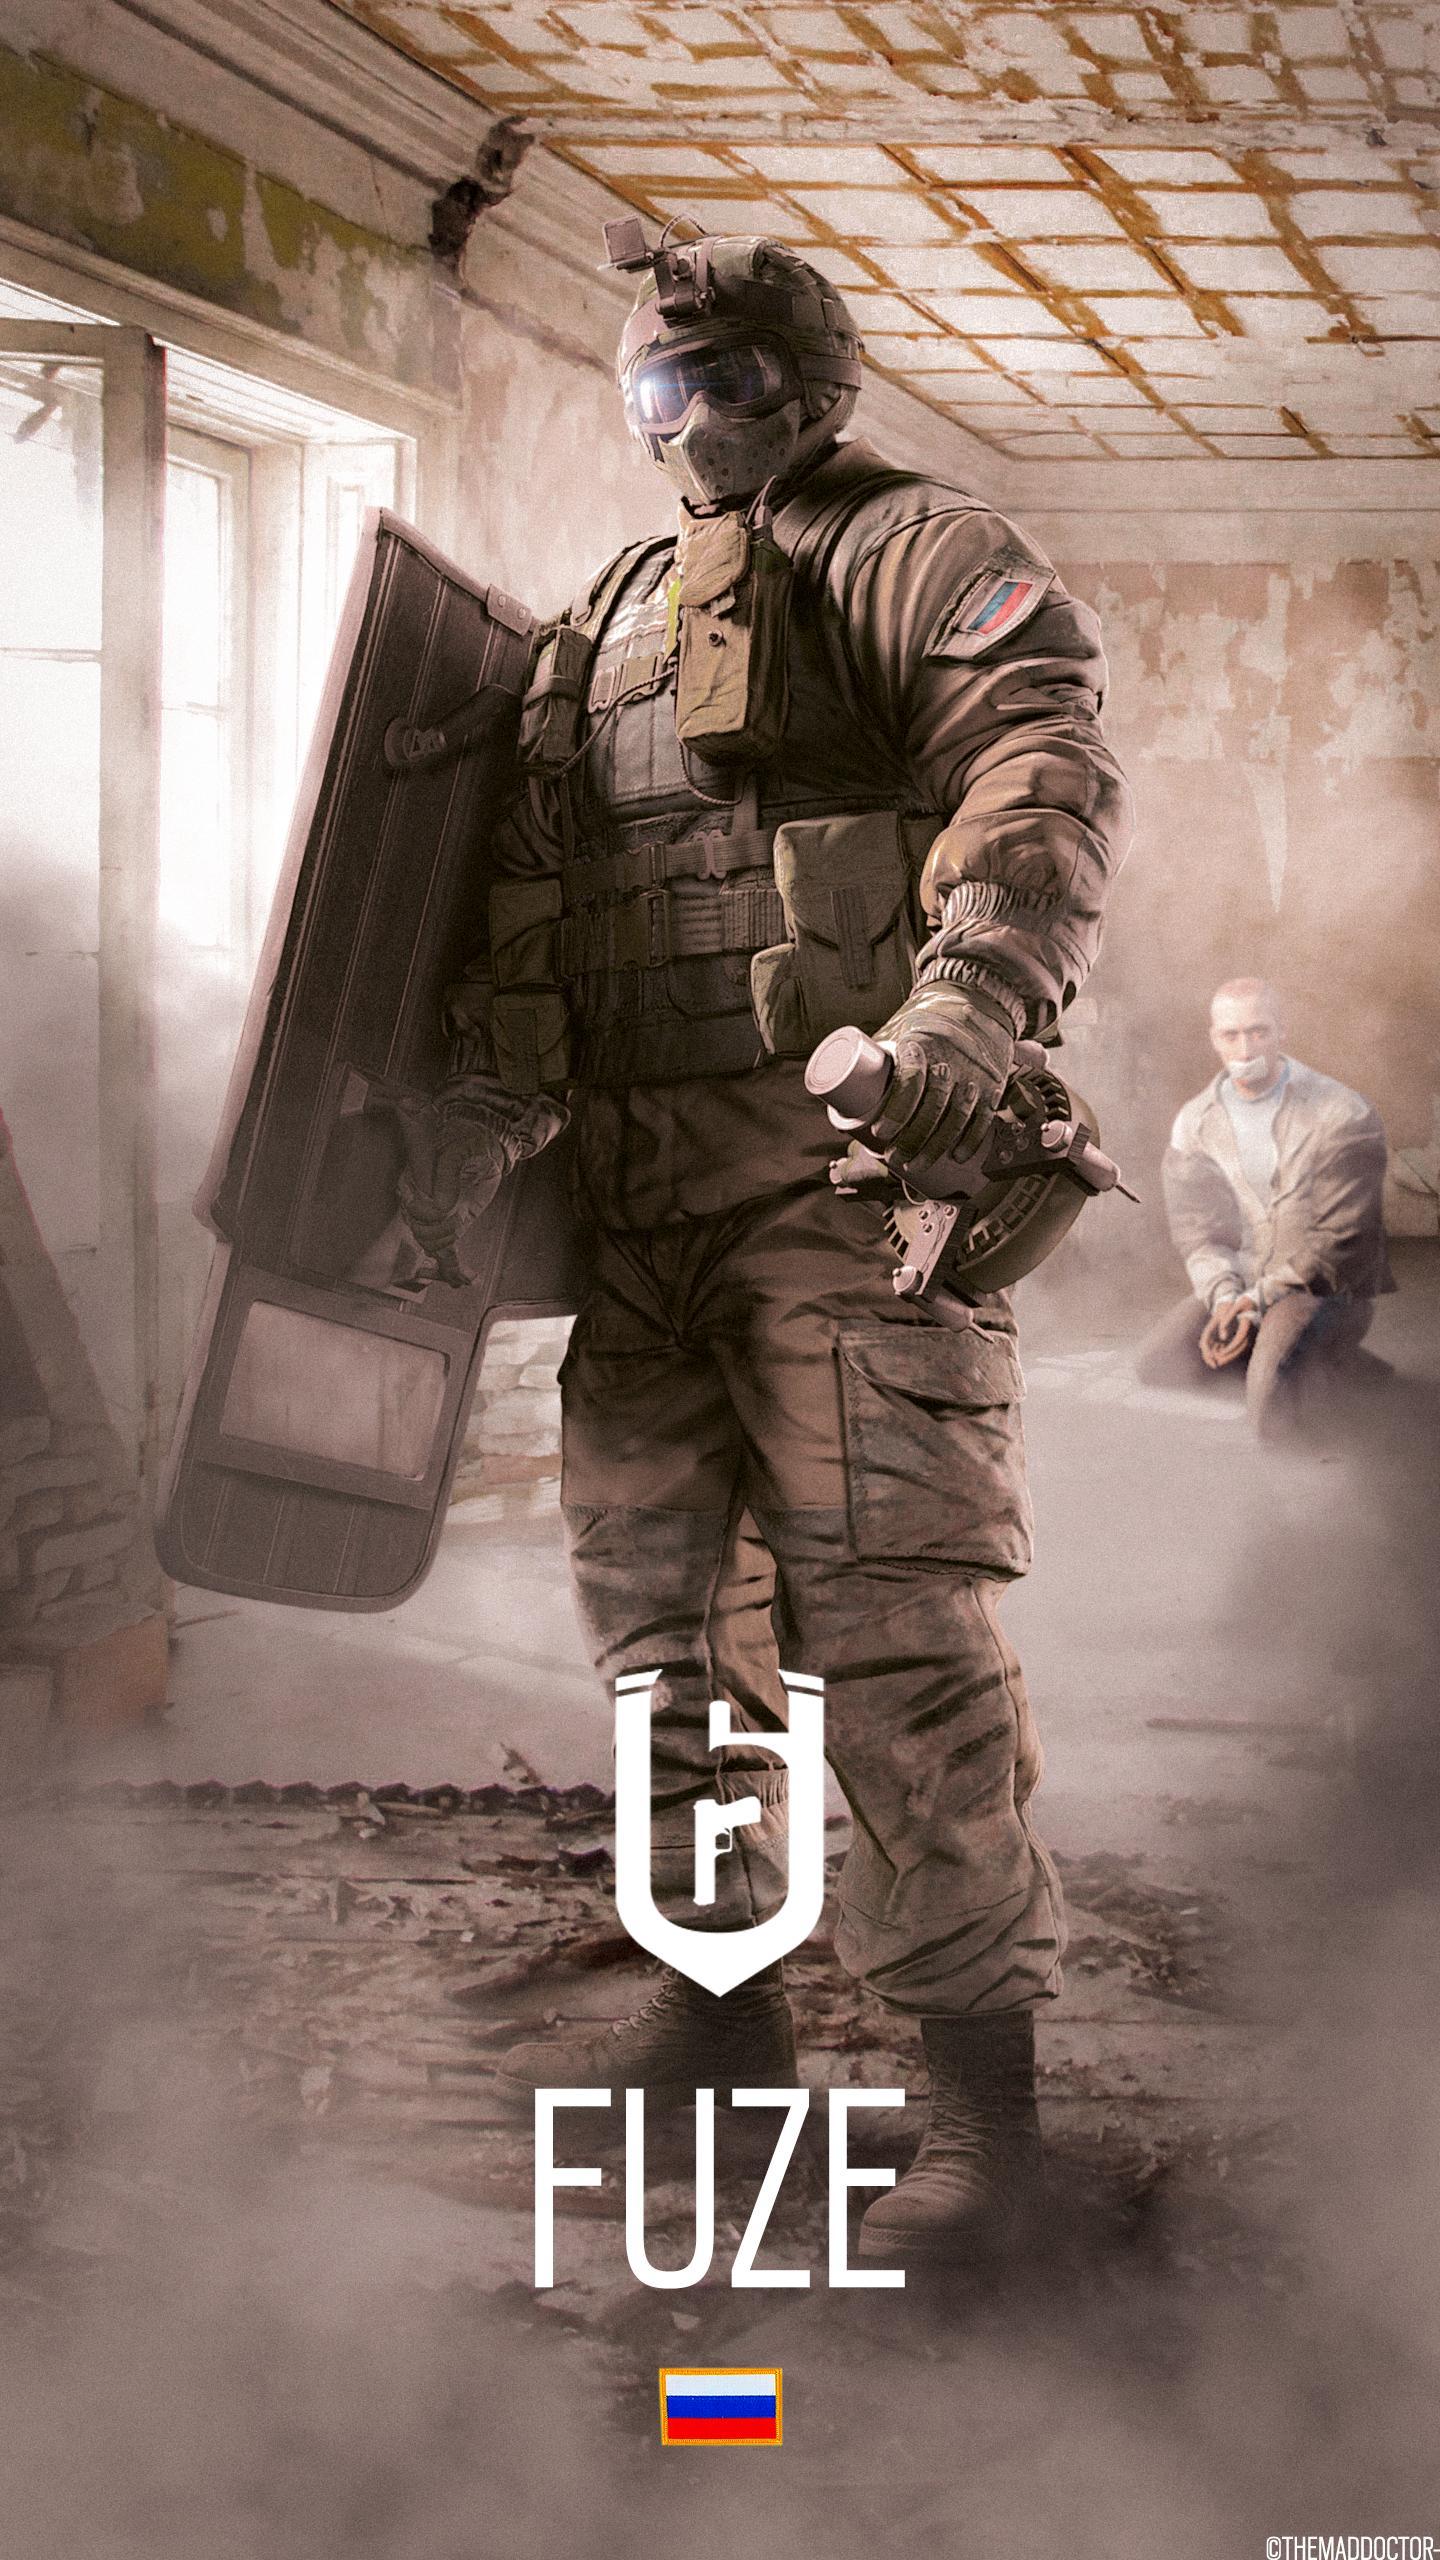 Fuze's phone wallpaper that I made. I'm sorry for the hostage